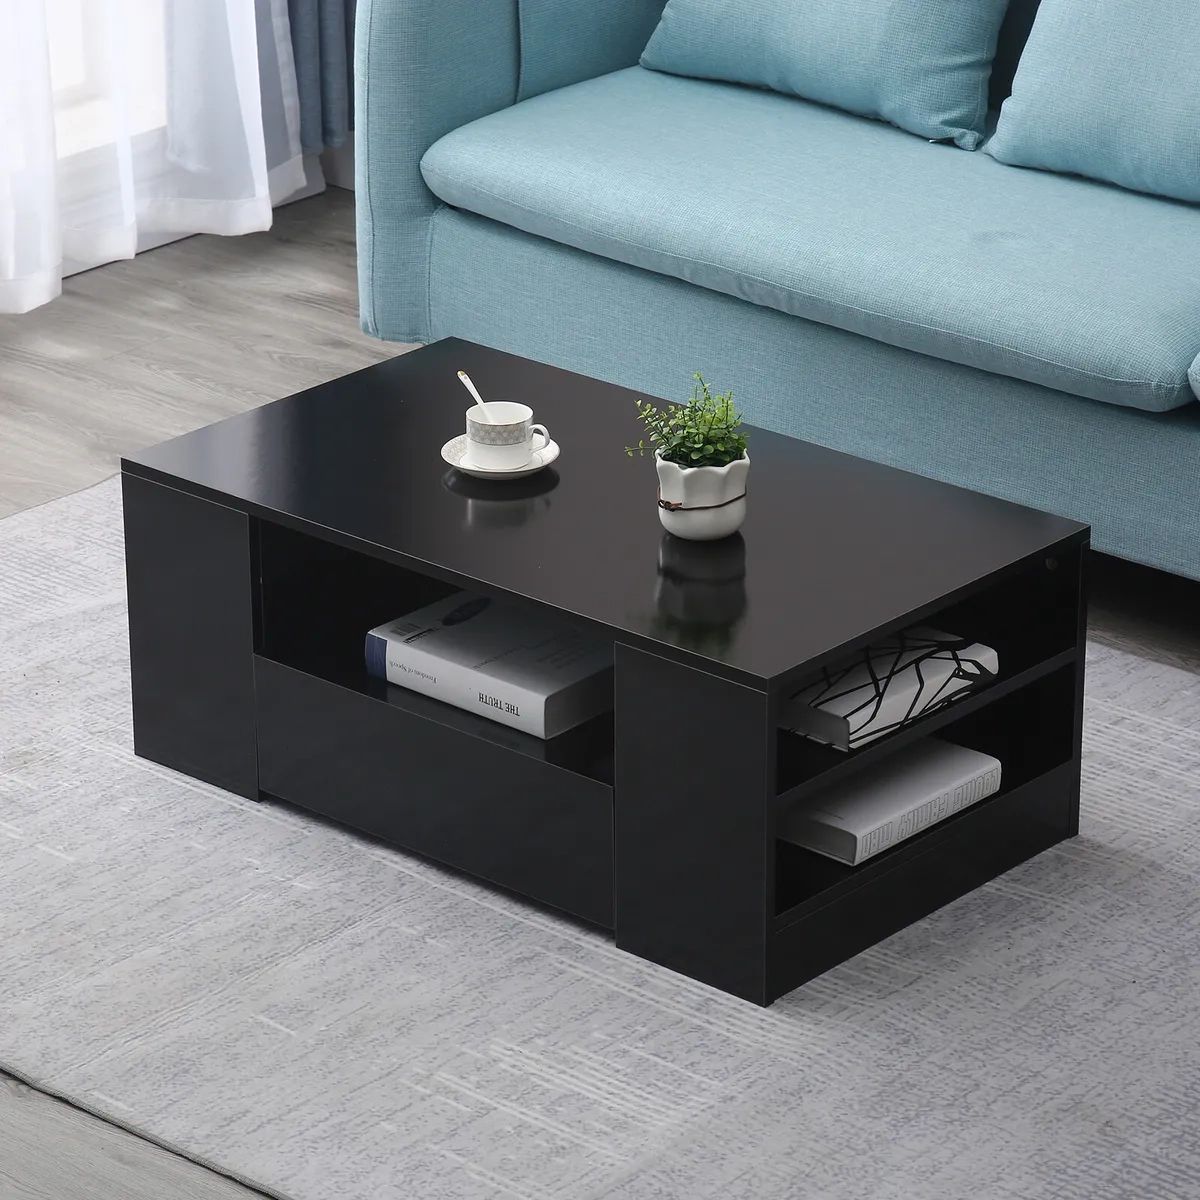 Modern Black Coffee Table High Gloss Rectangular End Table W/ 2 Drawers For  Home | Ebay Throughout High Gloss Black Coffee Tables (View 4 of 15)